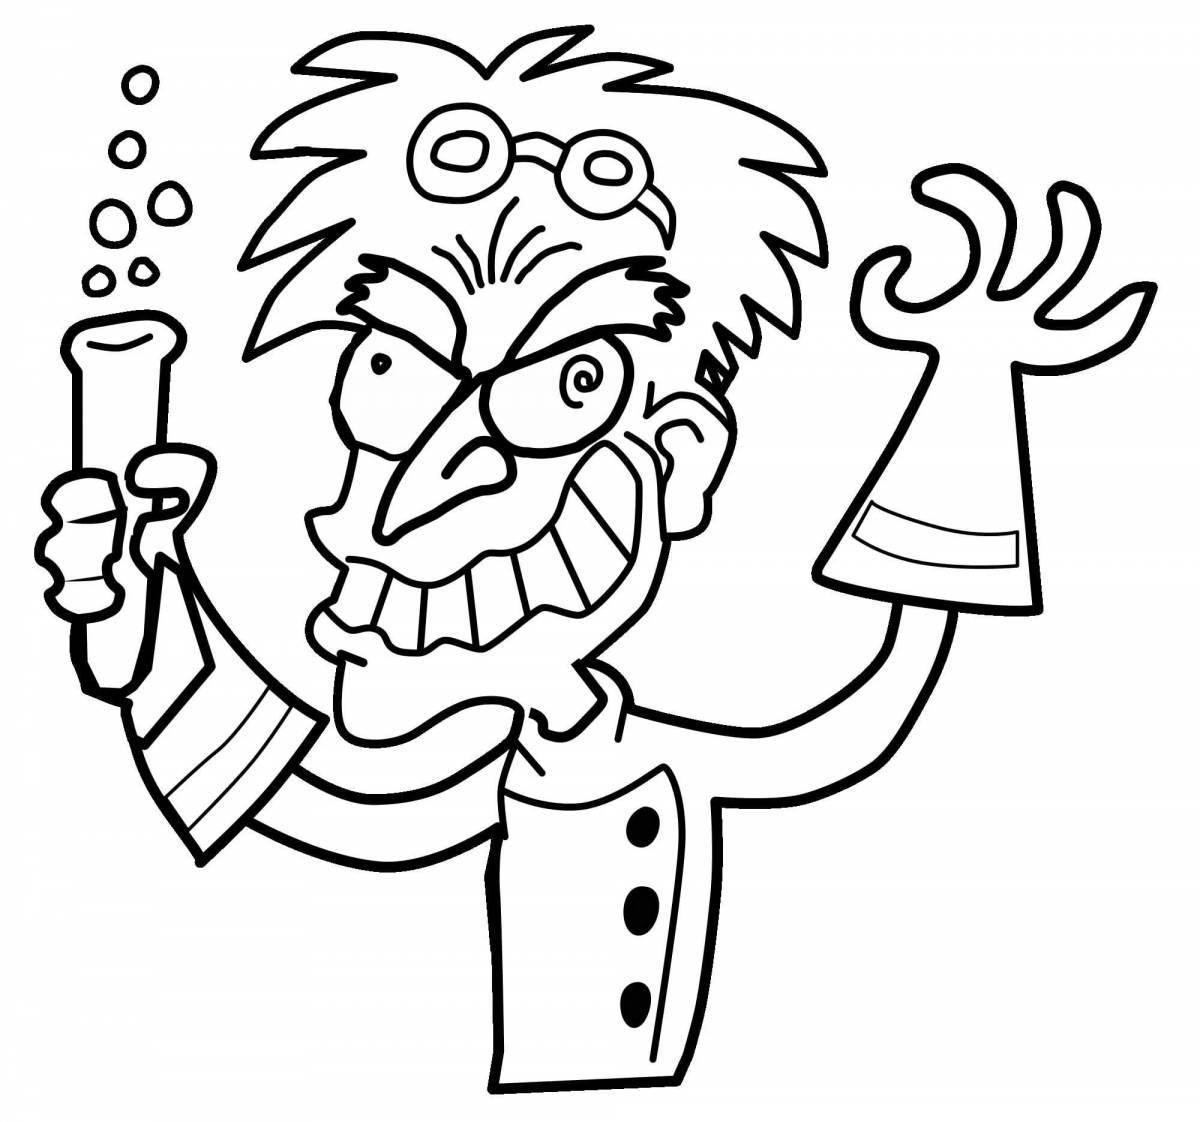 Coloring page excited scientist